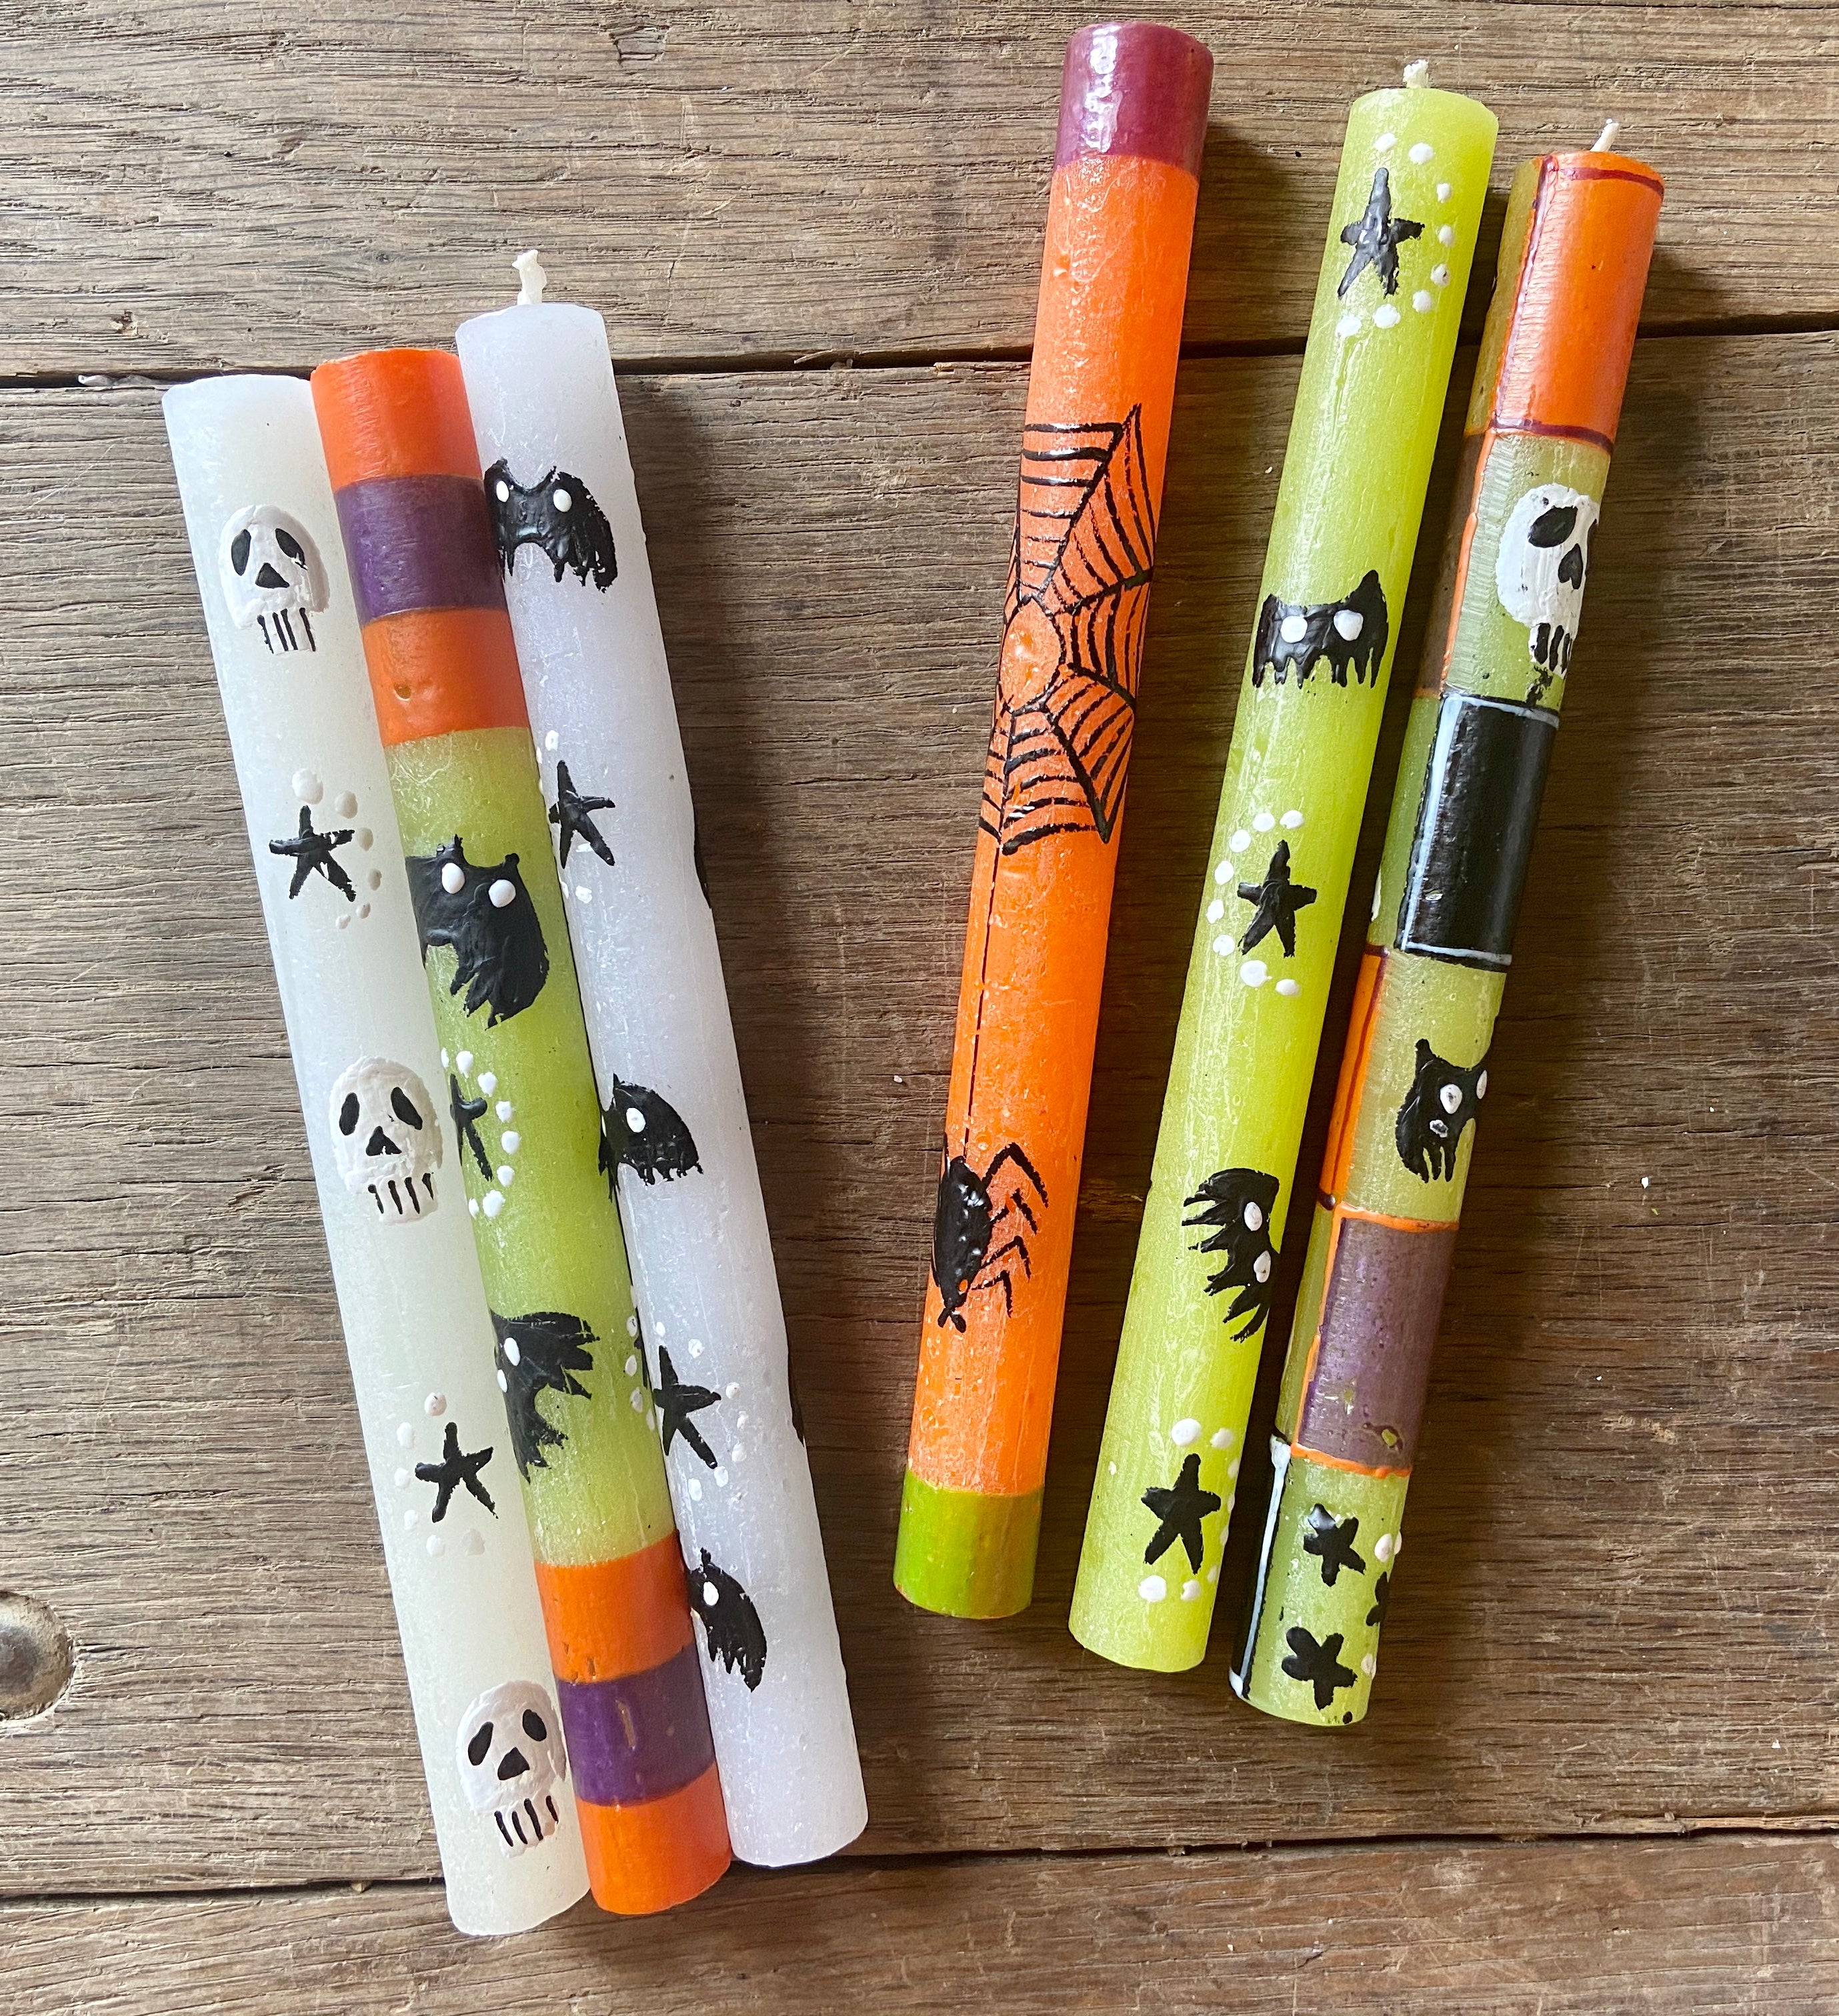 Halloween hand made & hand painted taper candles.  Fun Halloween designs; white taper candle with skulls & bats, green taper candle with bats and orange & dark purple stripe, orange taper candle with spider nest and spider climbing up to it!  Fair trade products.